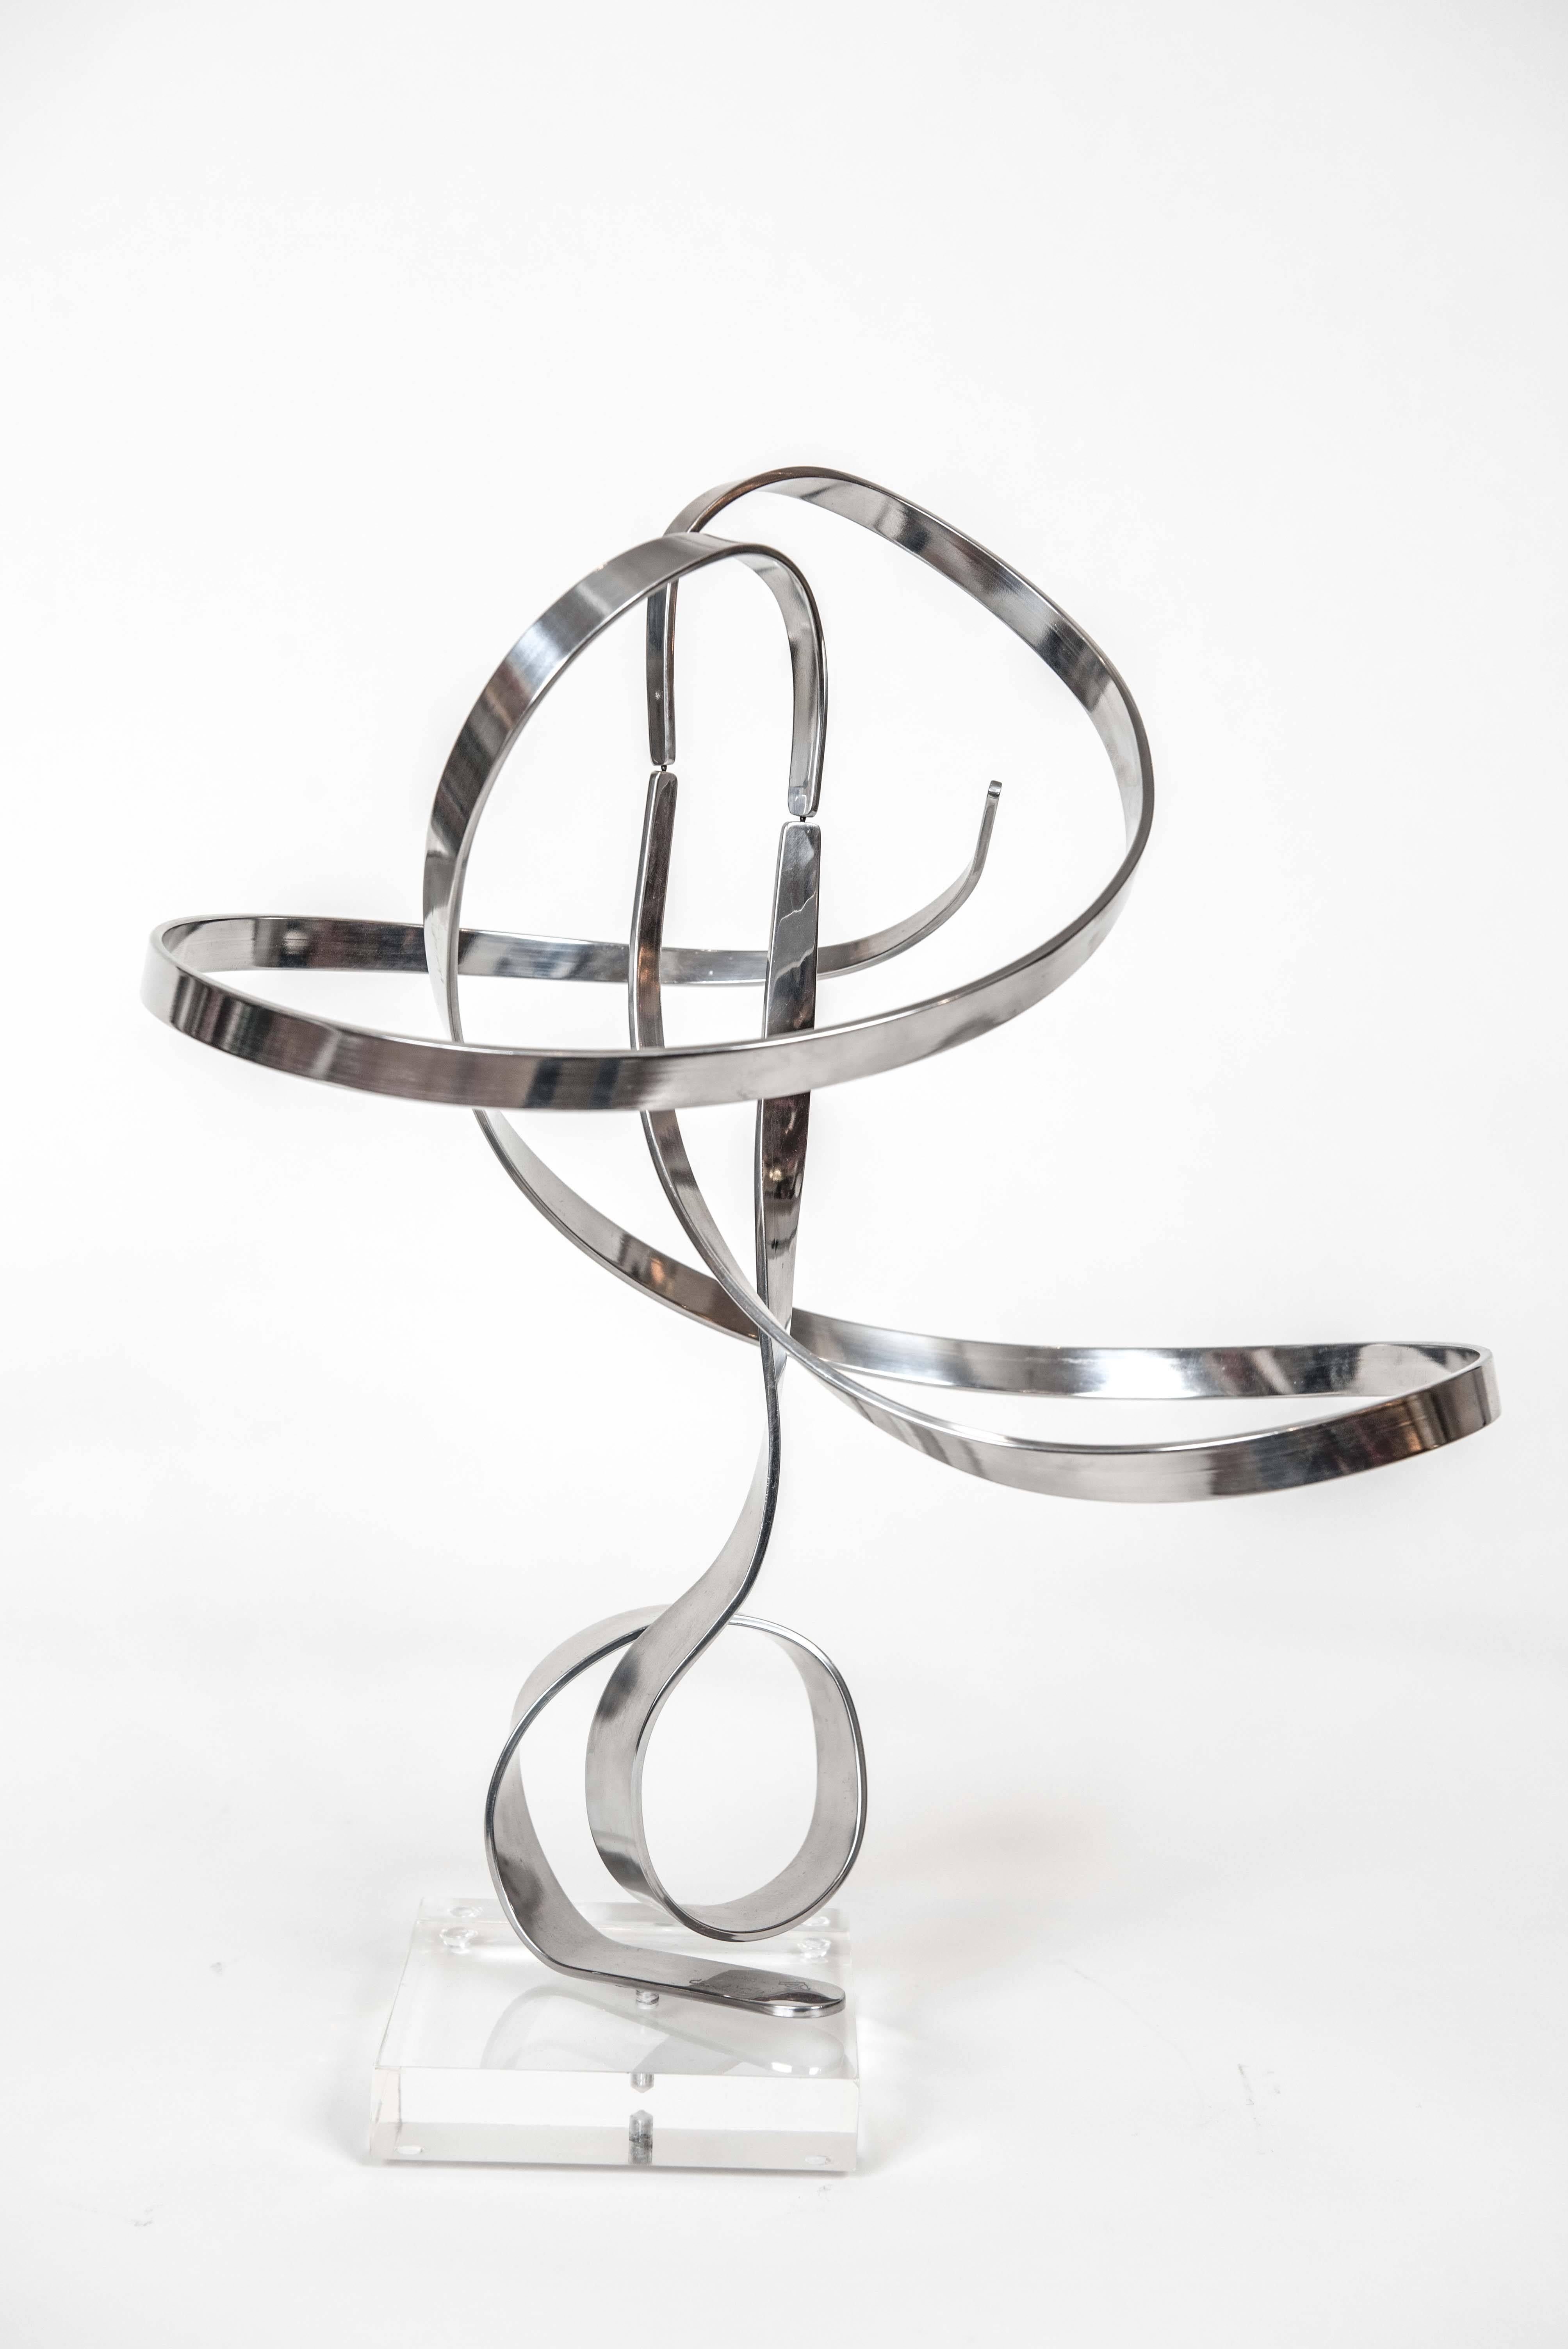 This dynamic and masterfully balanced (in two places) solid aluminum sculpture
is signed by the artist and marked with a 